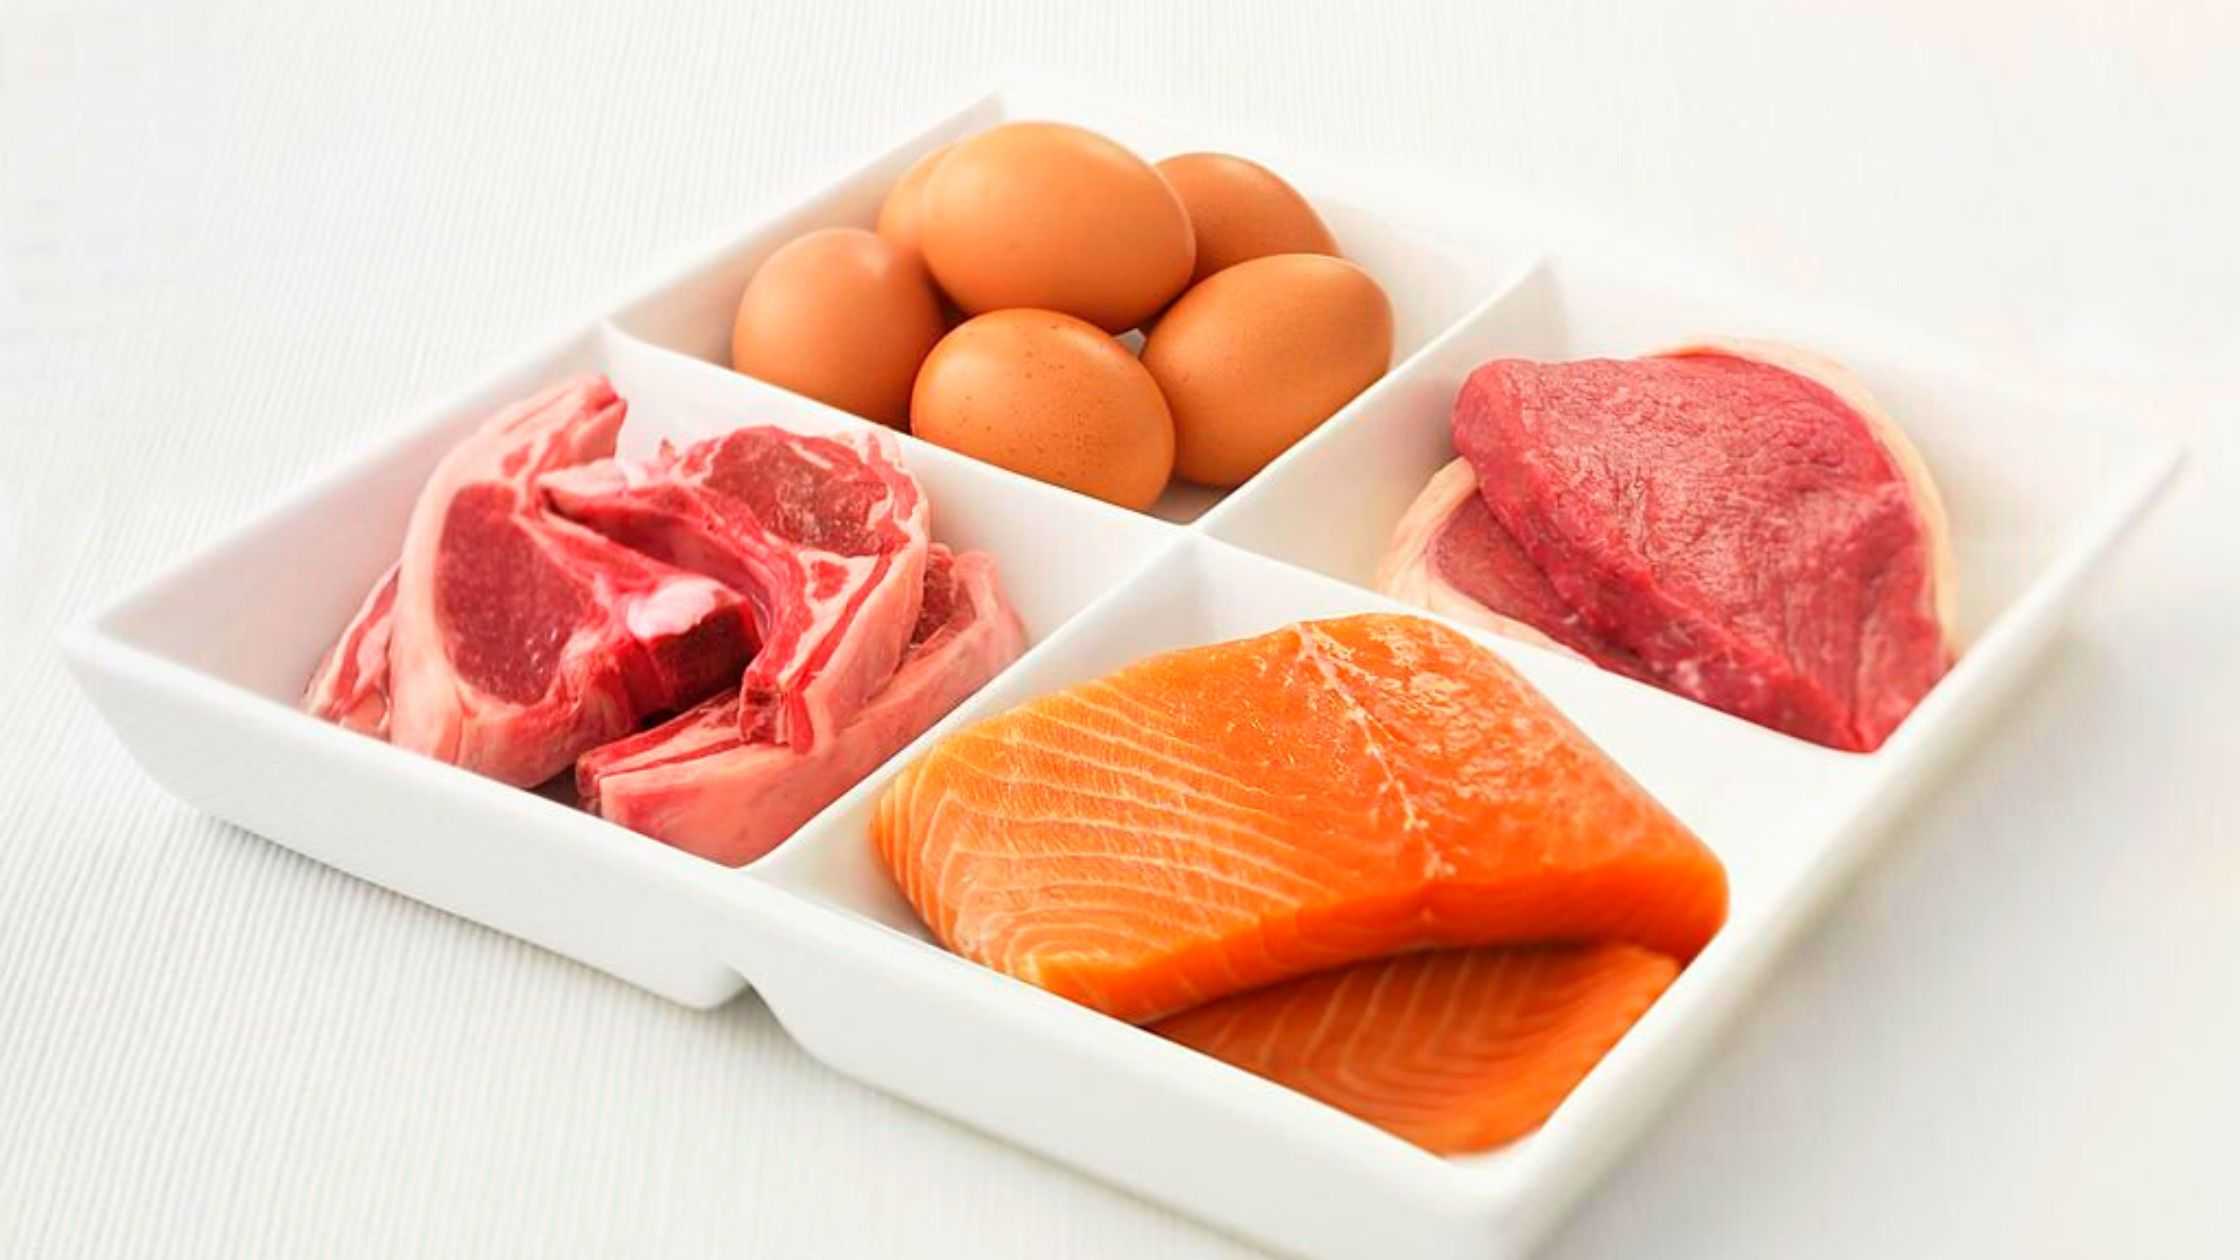 Protein Intake May Influence Weight Loss